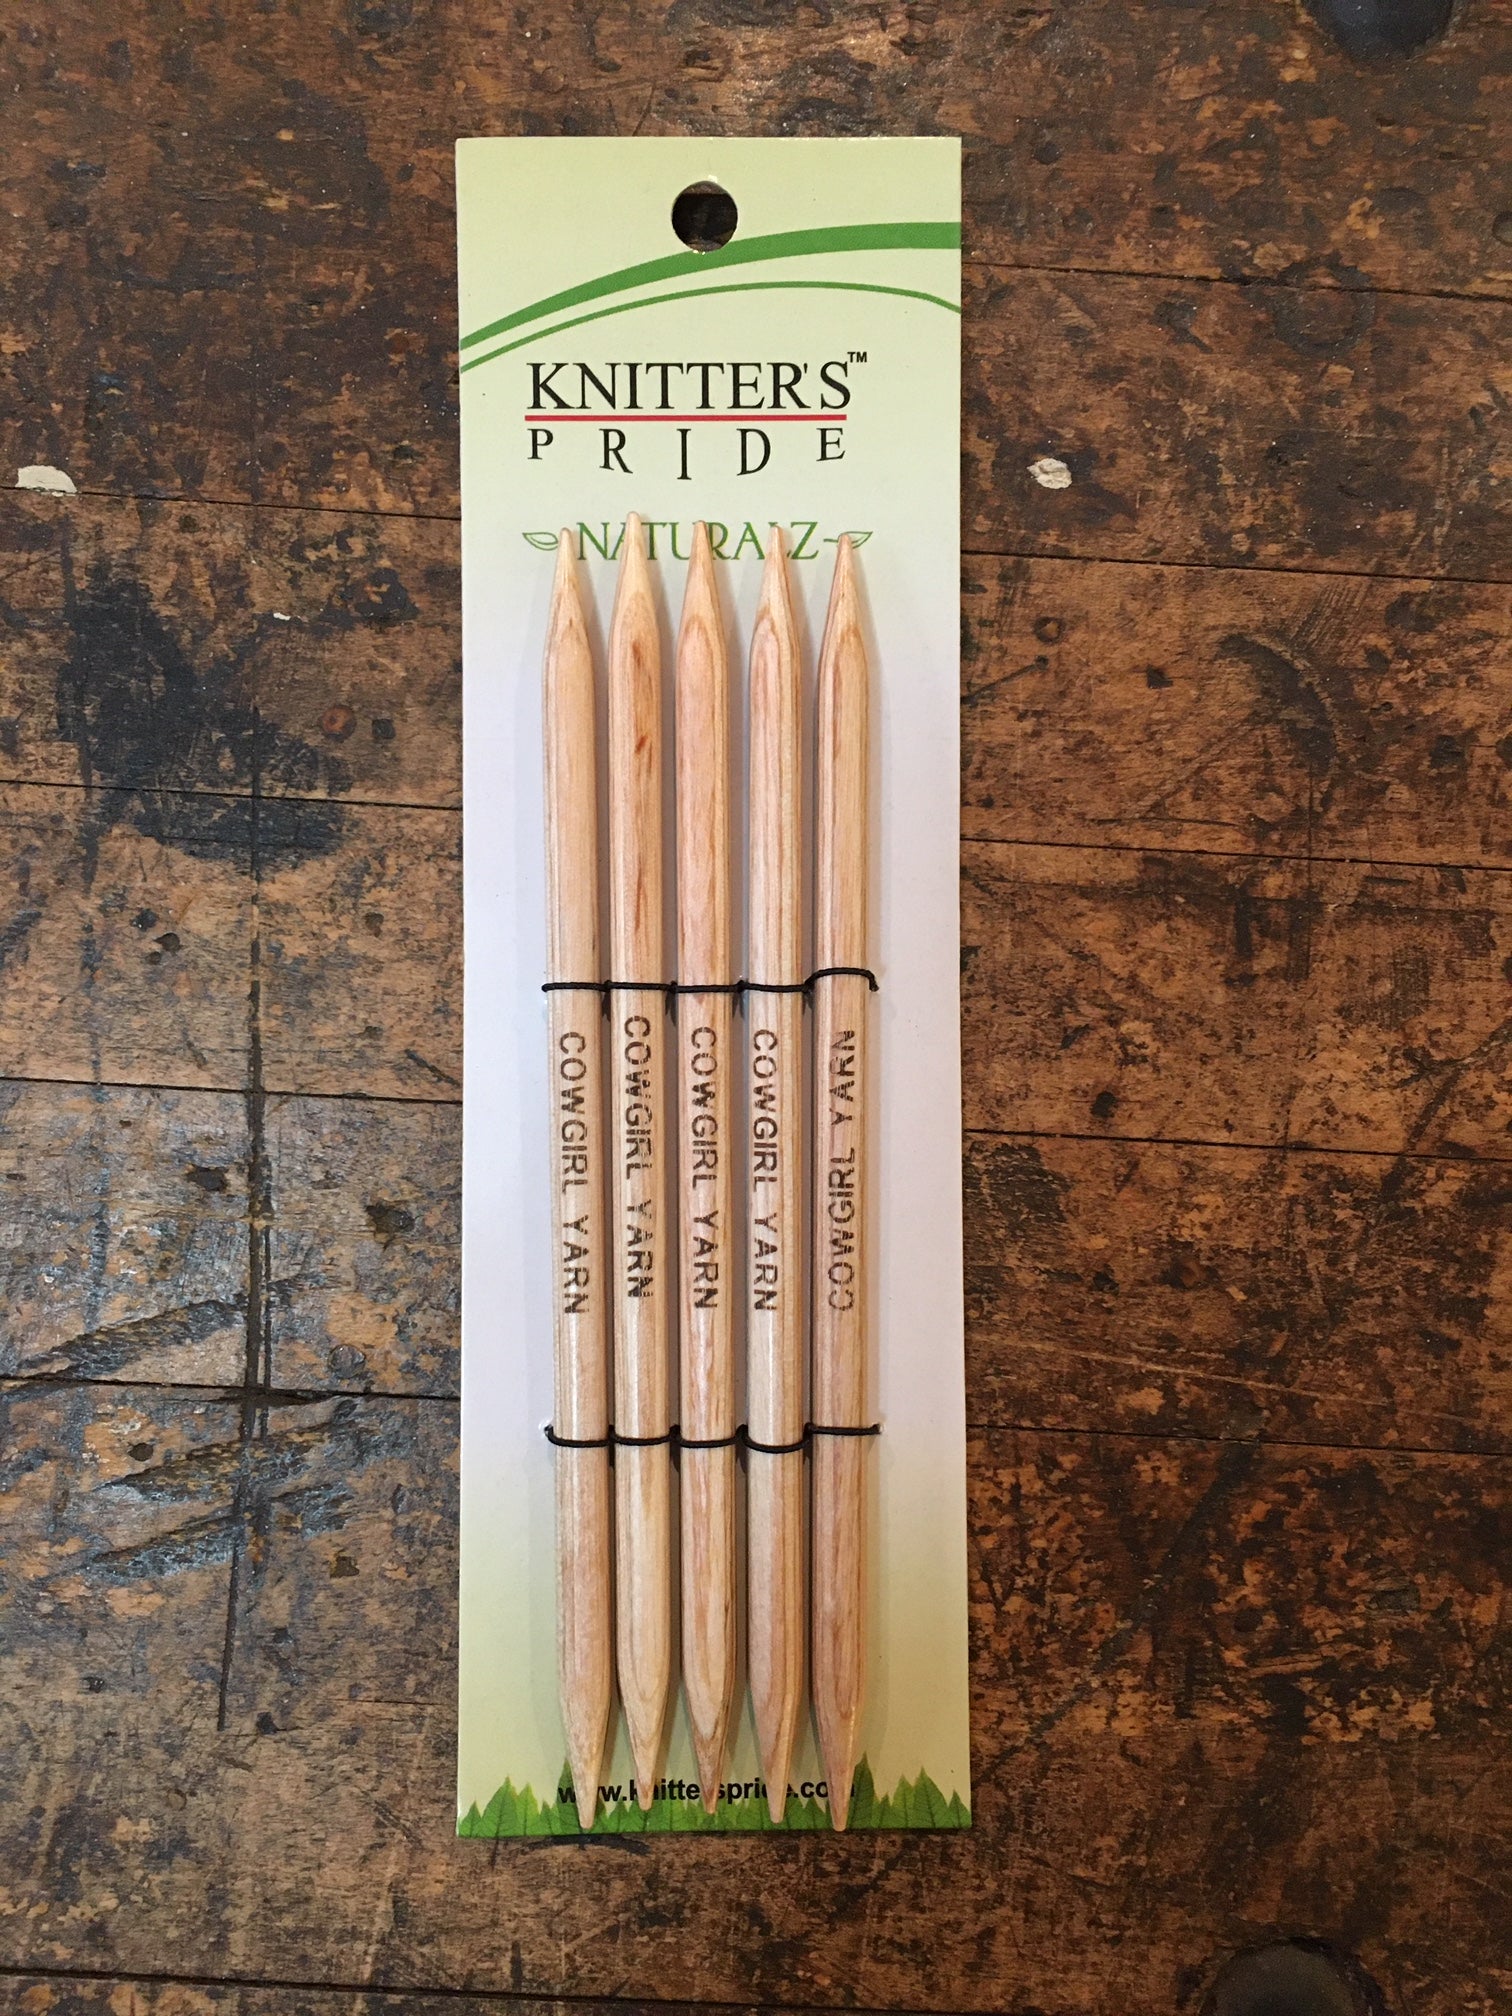 Knitter's Pride Naturalz double pointed knitting needles  6"